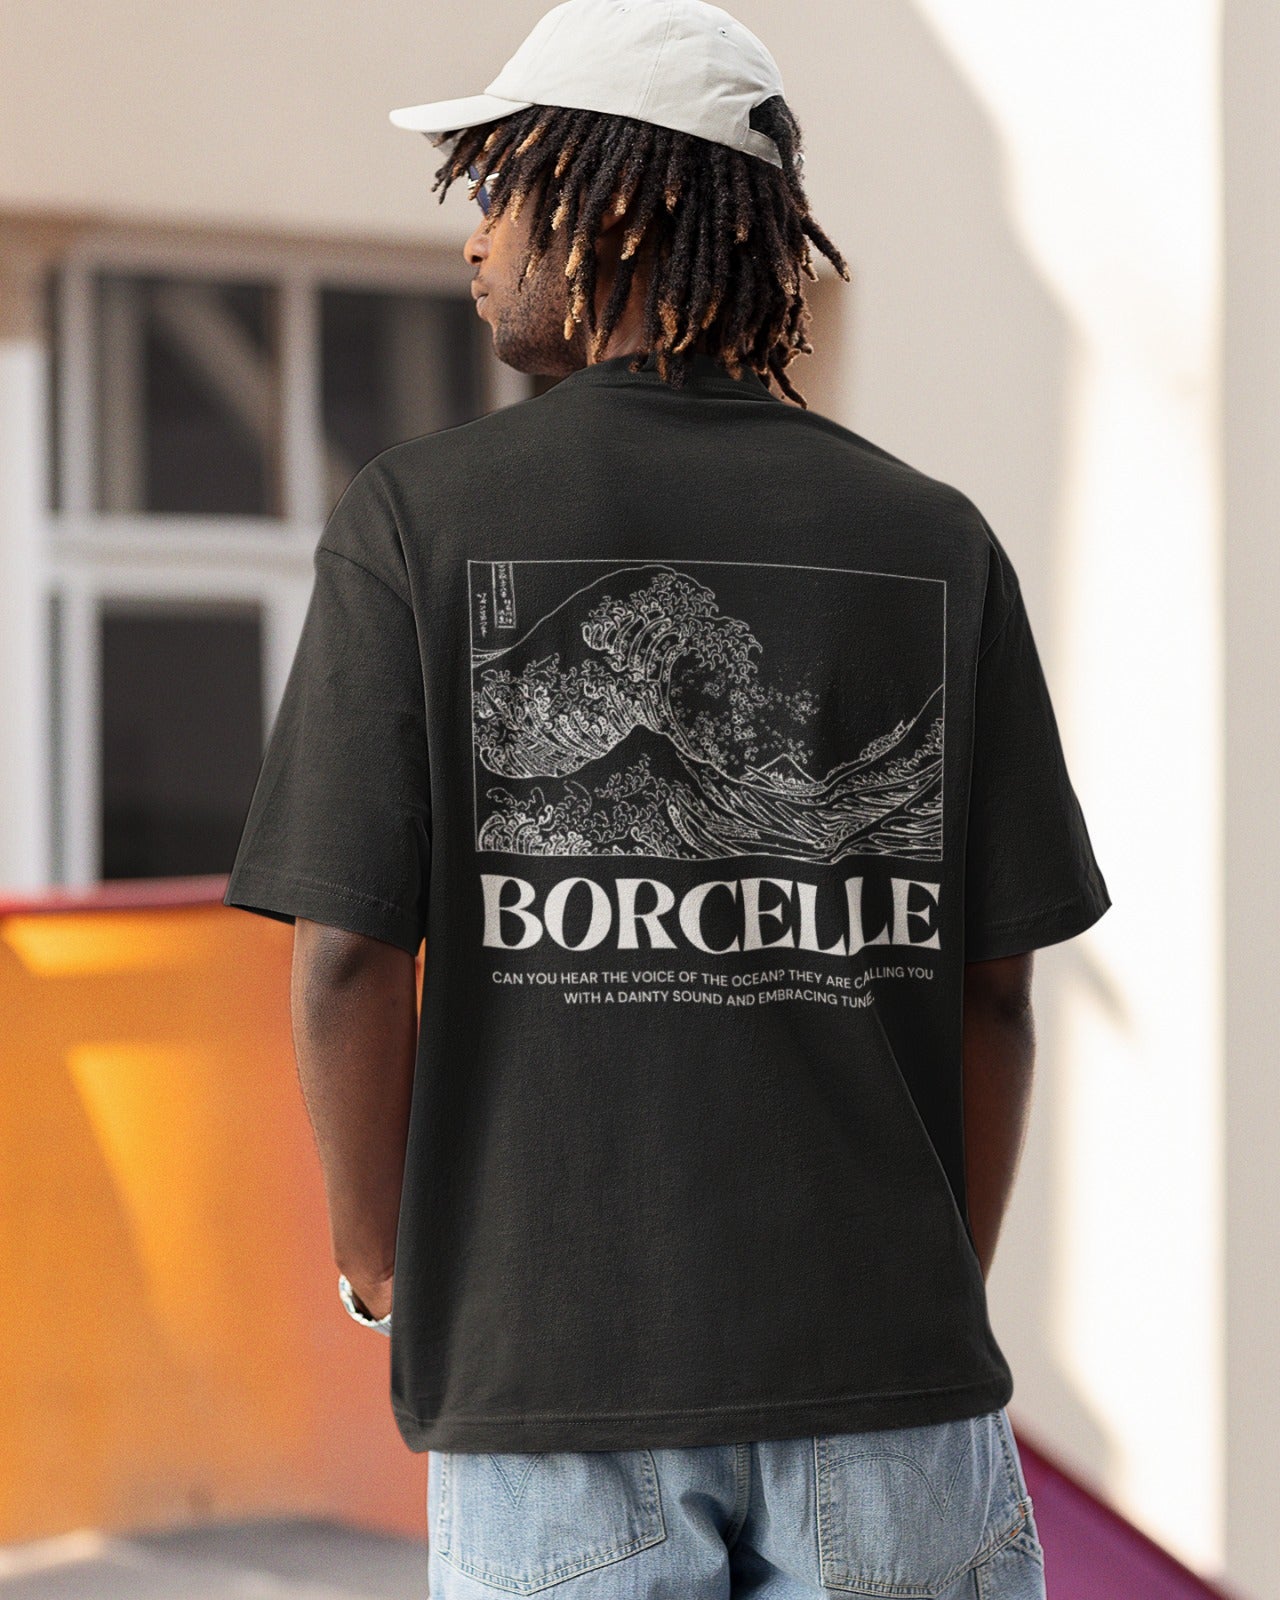 Elevate your style with our Premium Black Oversized T-Shirt featuring a stunning Japanese-style wave painting on the back, titled "BORCELLE." Below, a poetic caption reads, "Can you hear the voice of the ocean? They are calling you with a dainty sound and embracing tune." Crafted with meticulous attention to detail, this tee is both a fashion statement and a work of art, connecting you to the ocean's soothing melodies. Order yours today and embrace the beauty of nature in style.